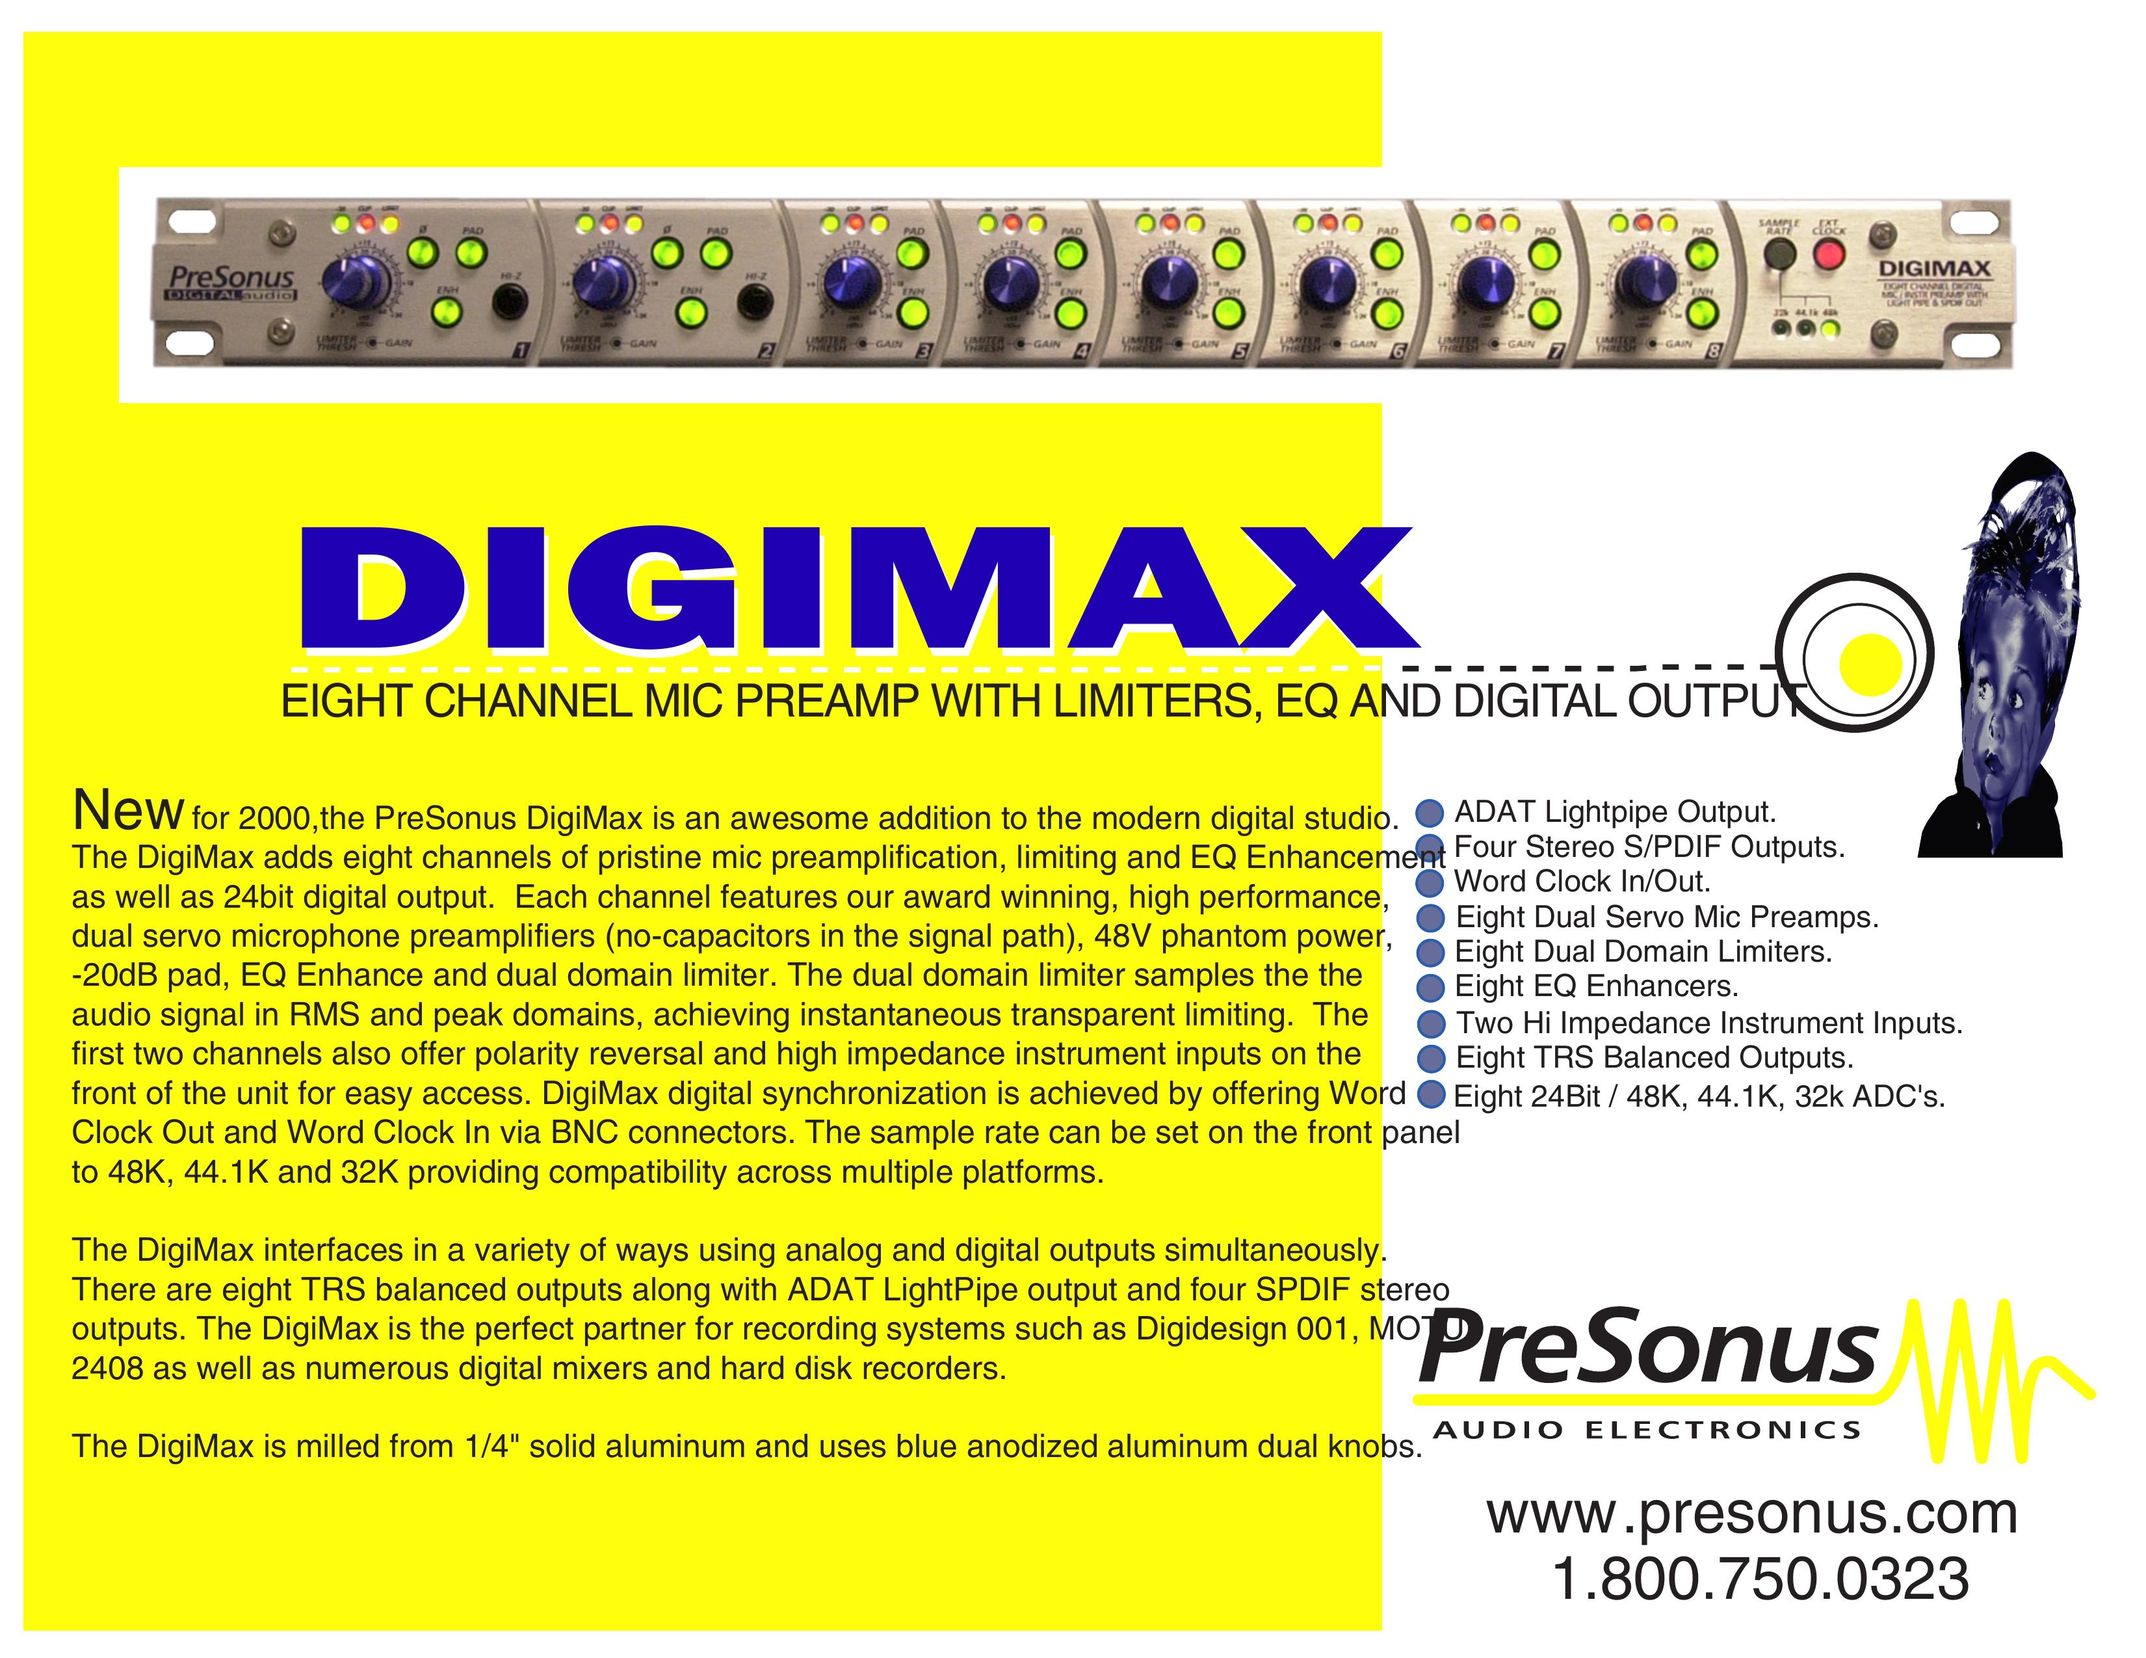 Presonus Audio electronic Eight Channel Mic Preamp Stereo Amplifier User Manual